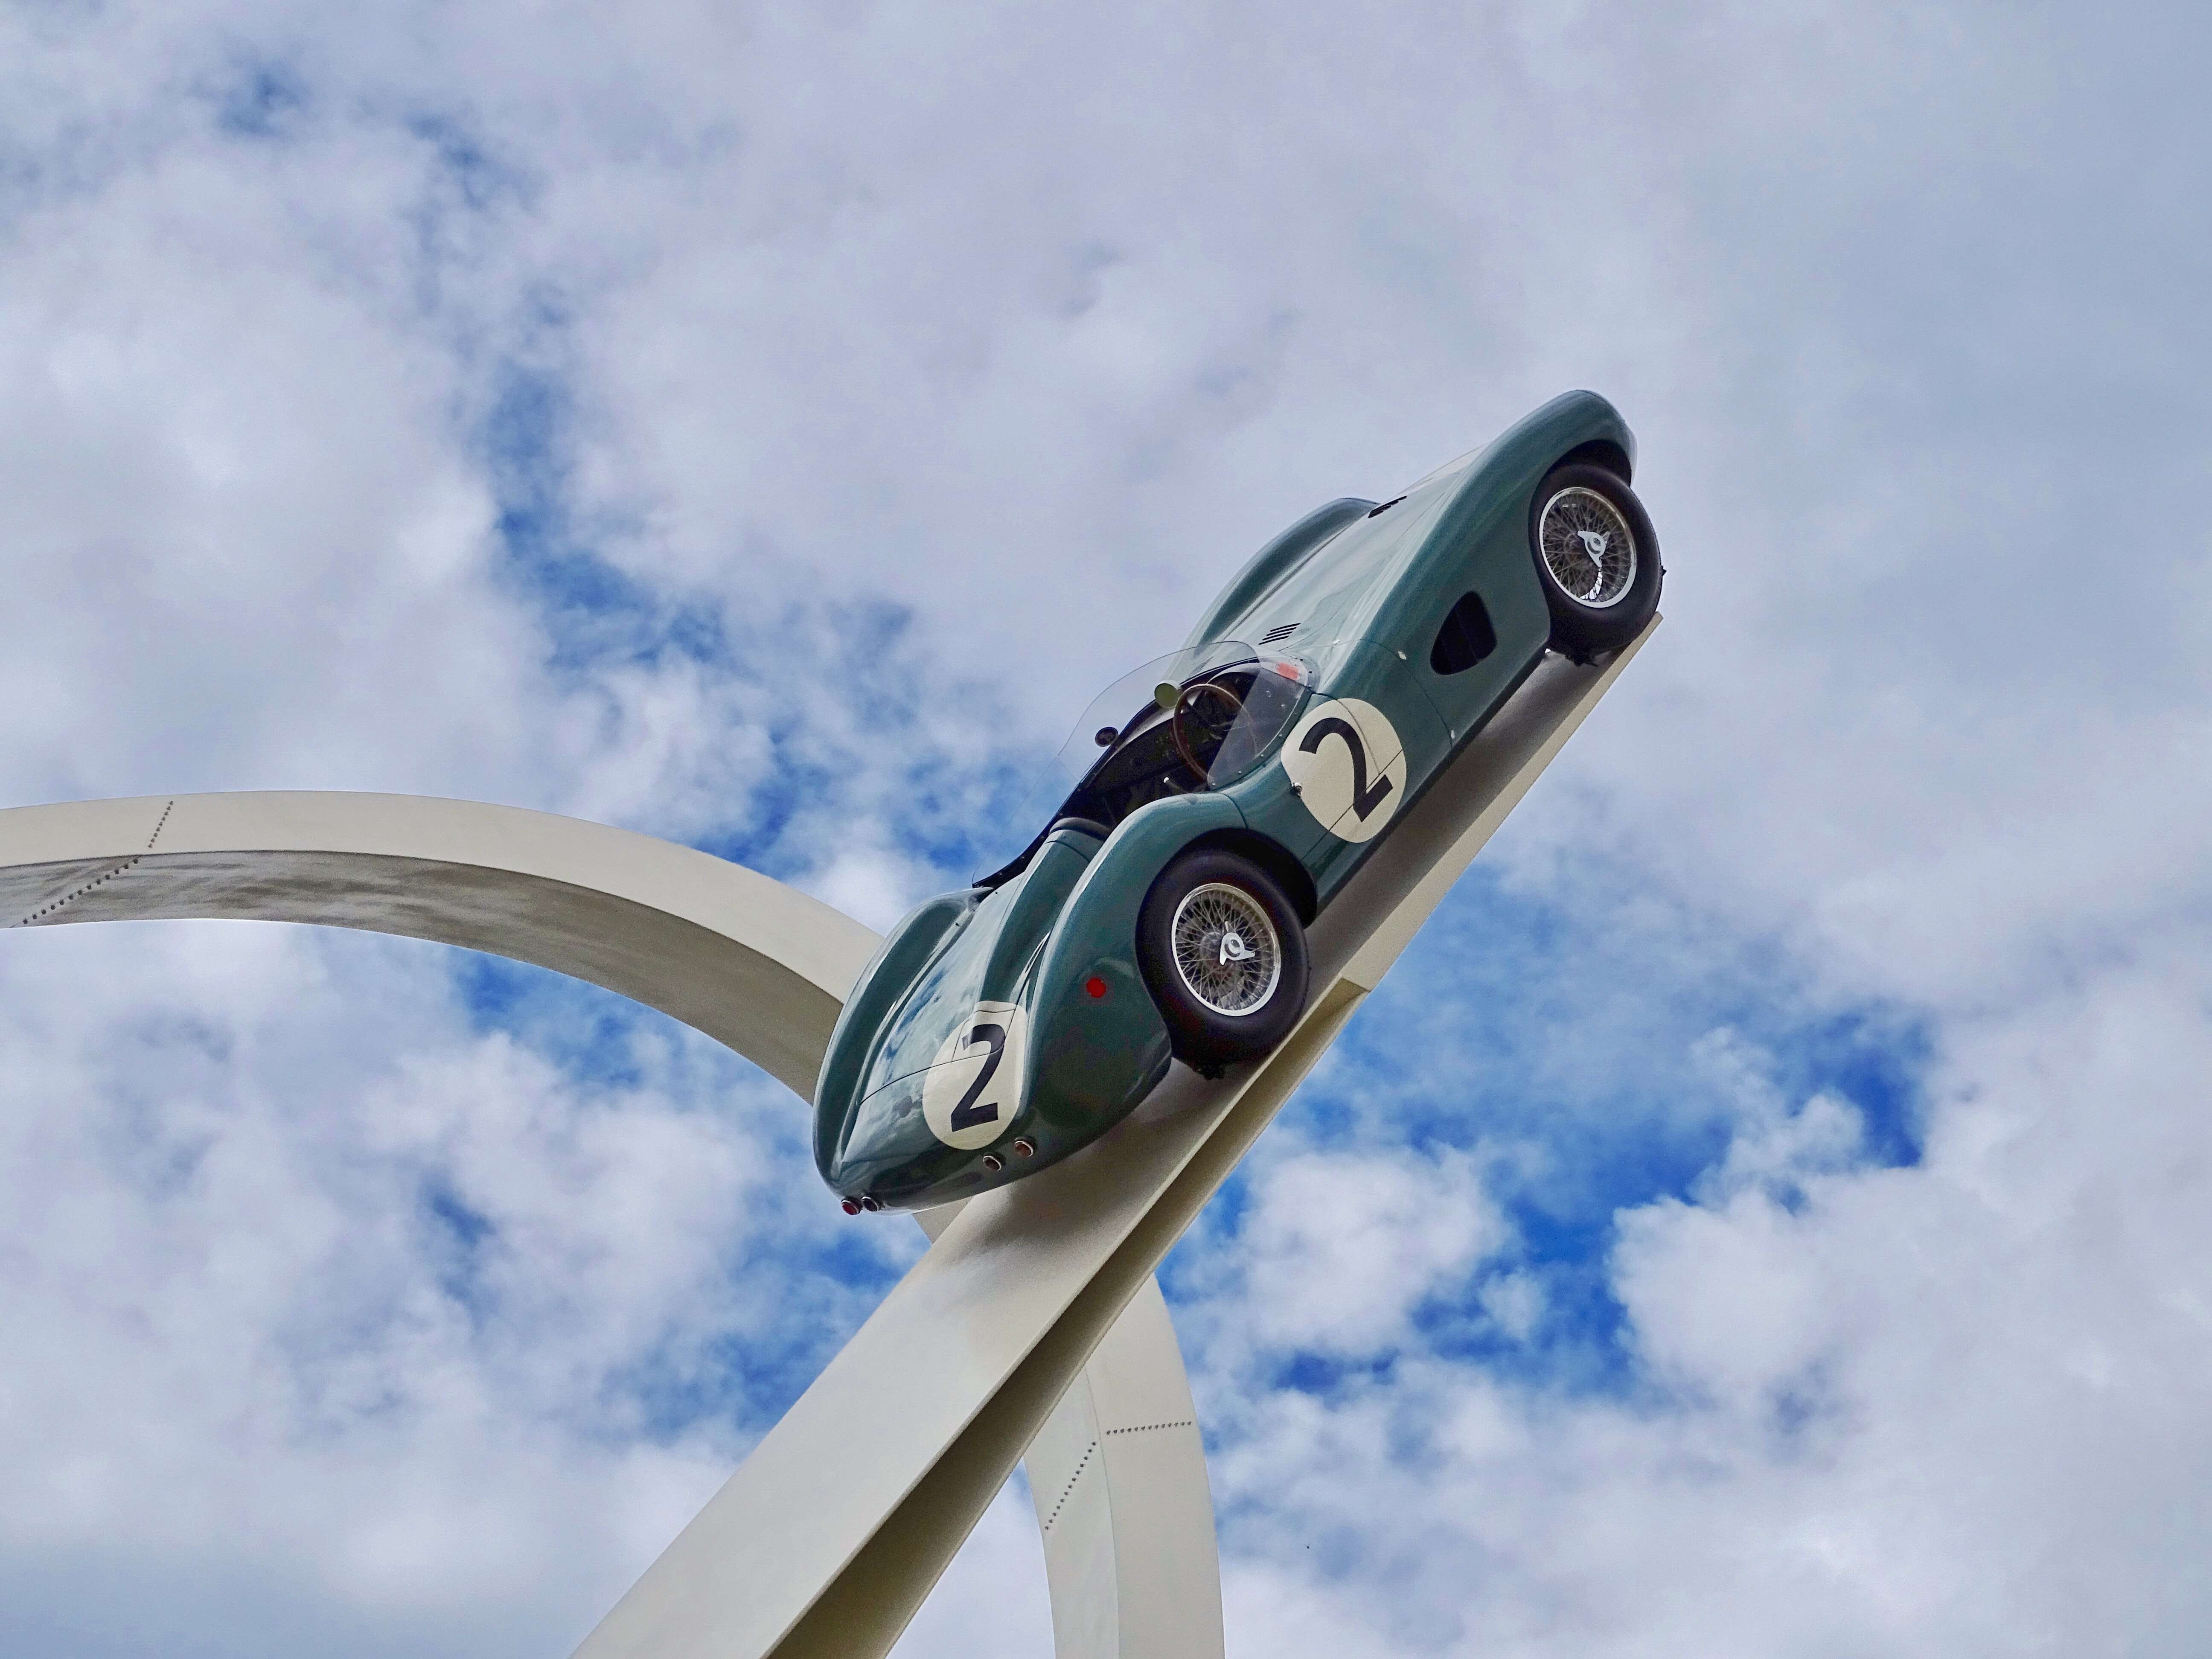 Goodwood Festival of Speed car statue